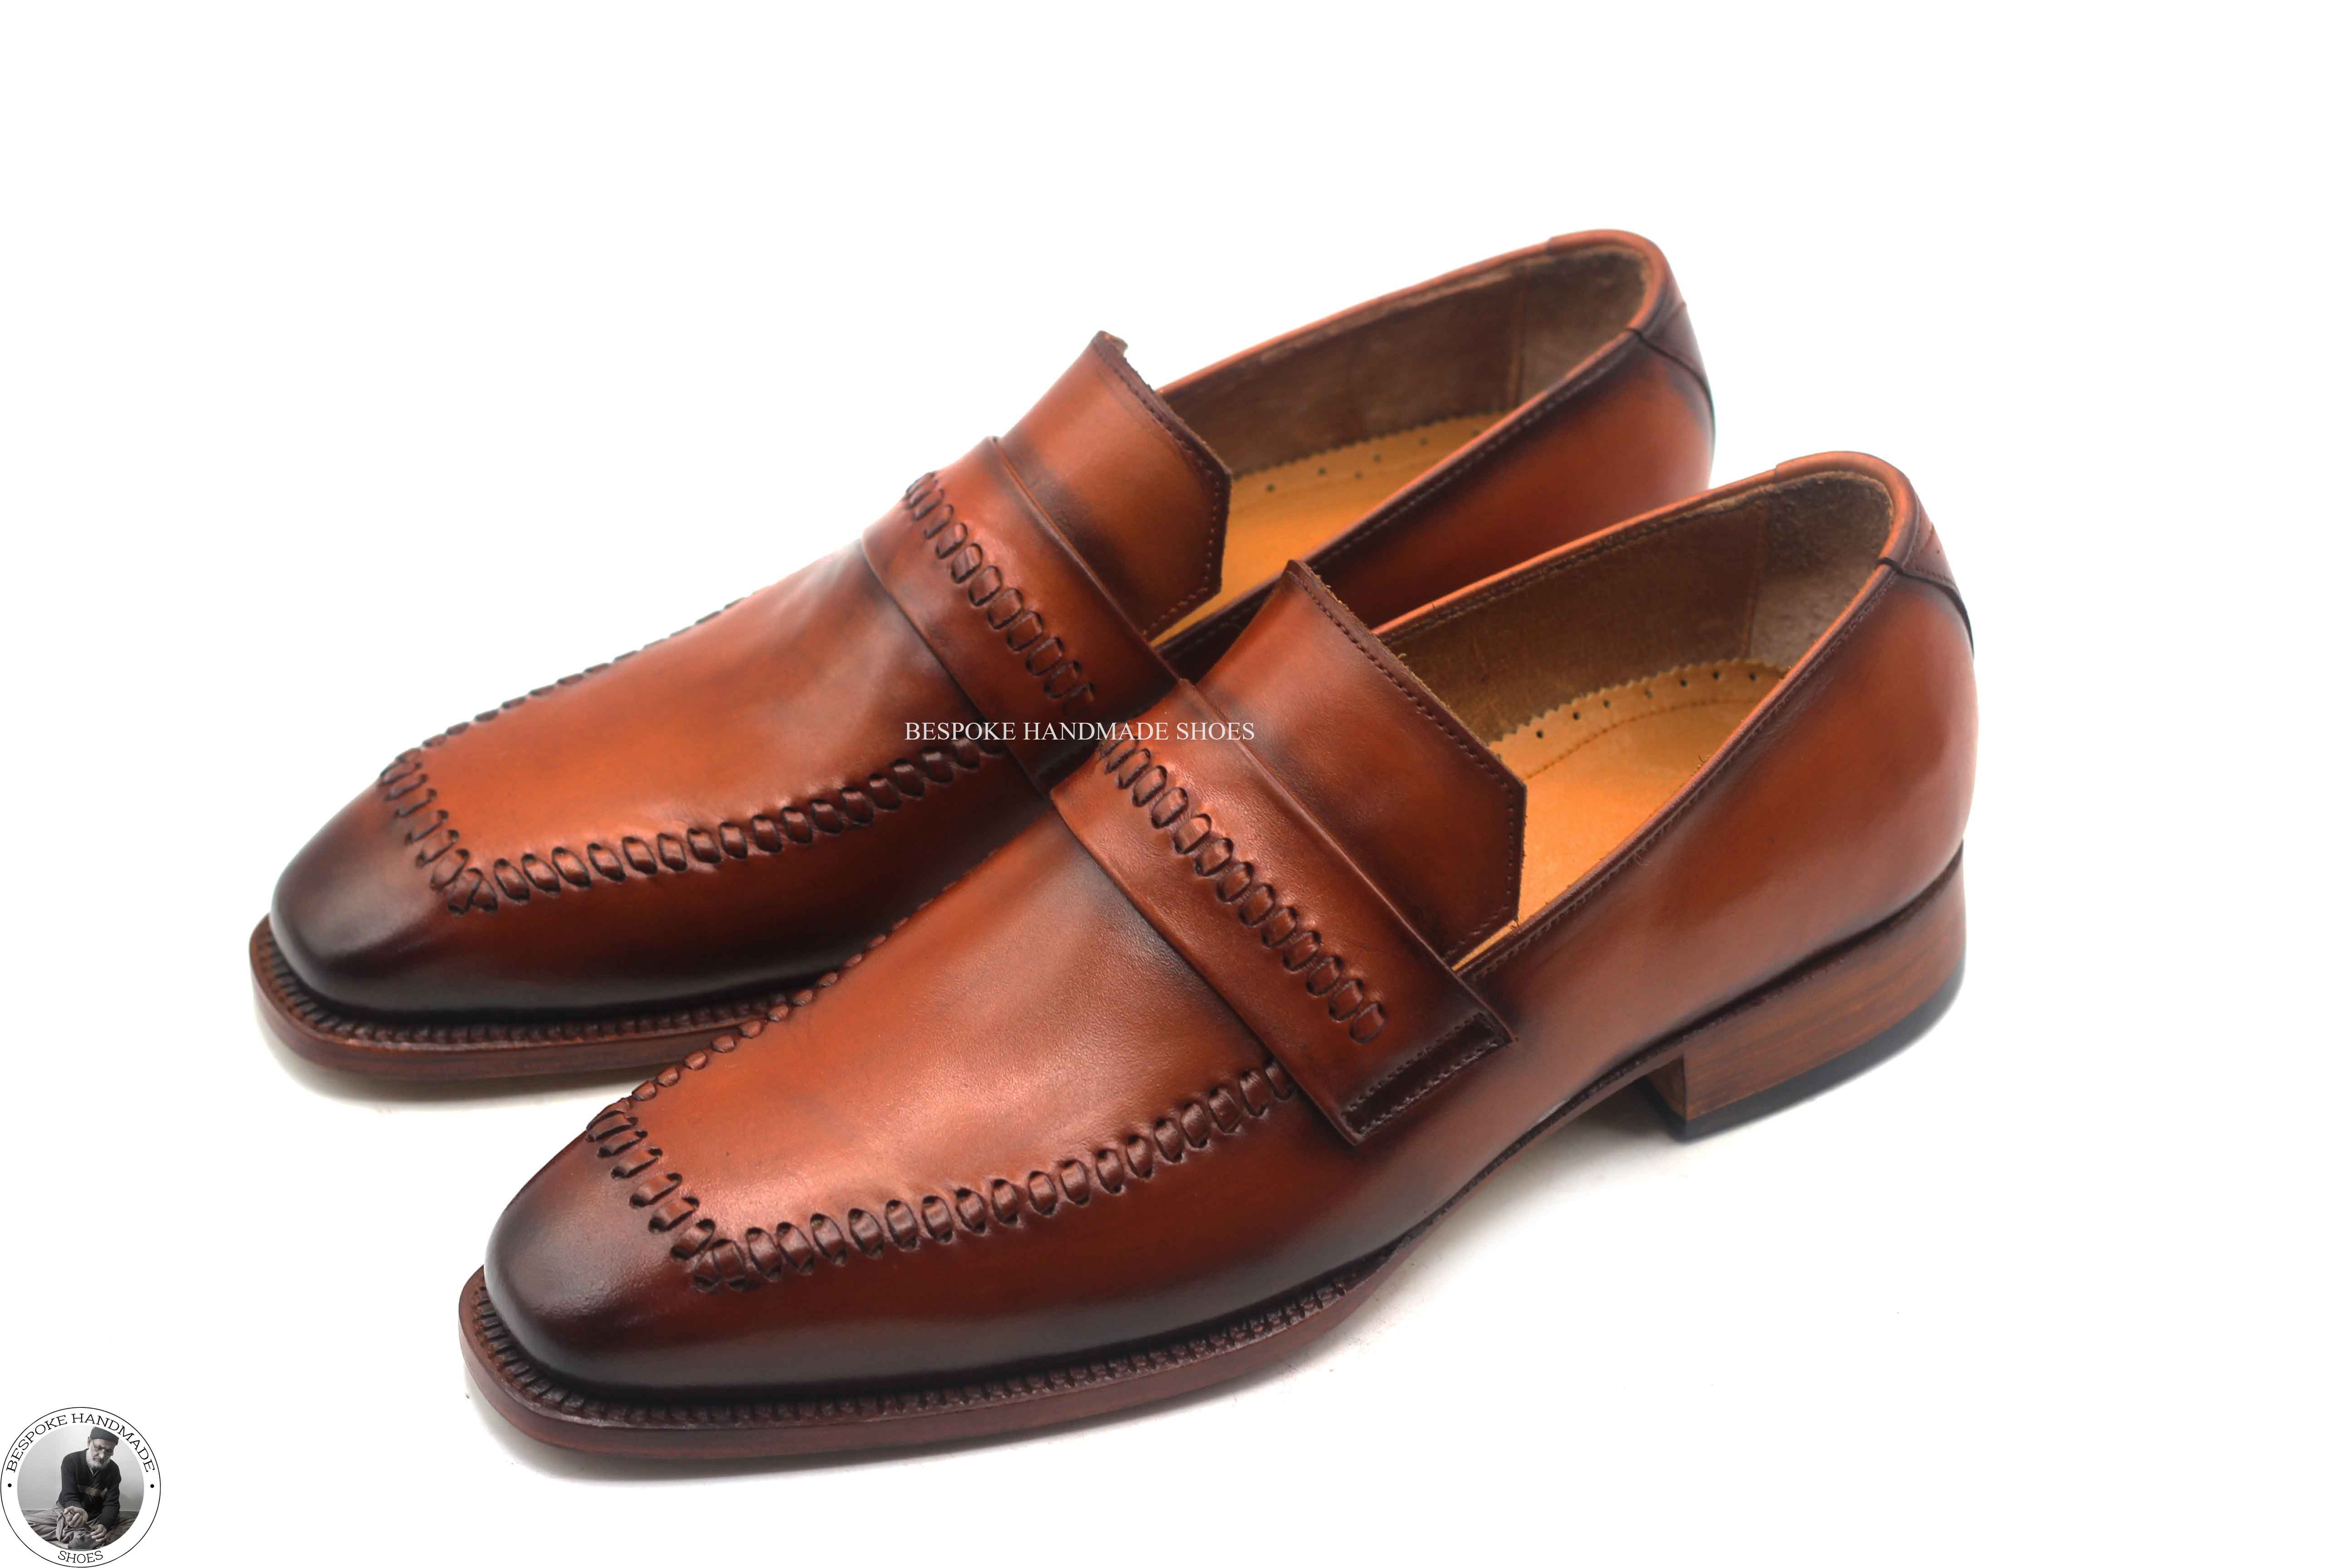 Copy of Bespoke Men's Handmade Brown Leather Shaded Toe Leather Slip On Loafer Casual Men's Shoes